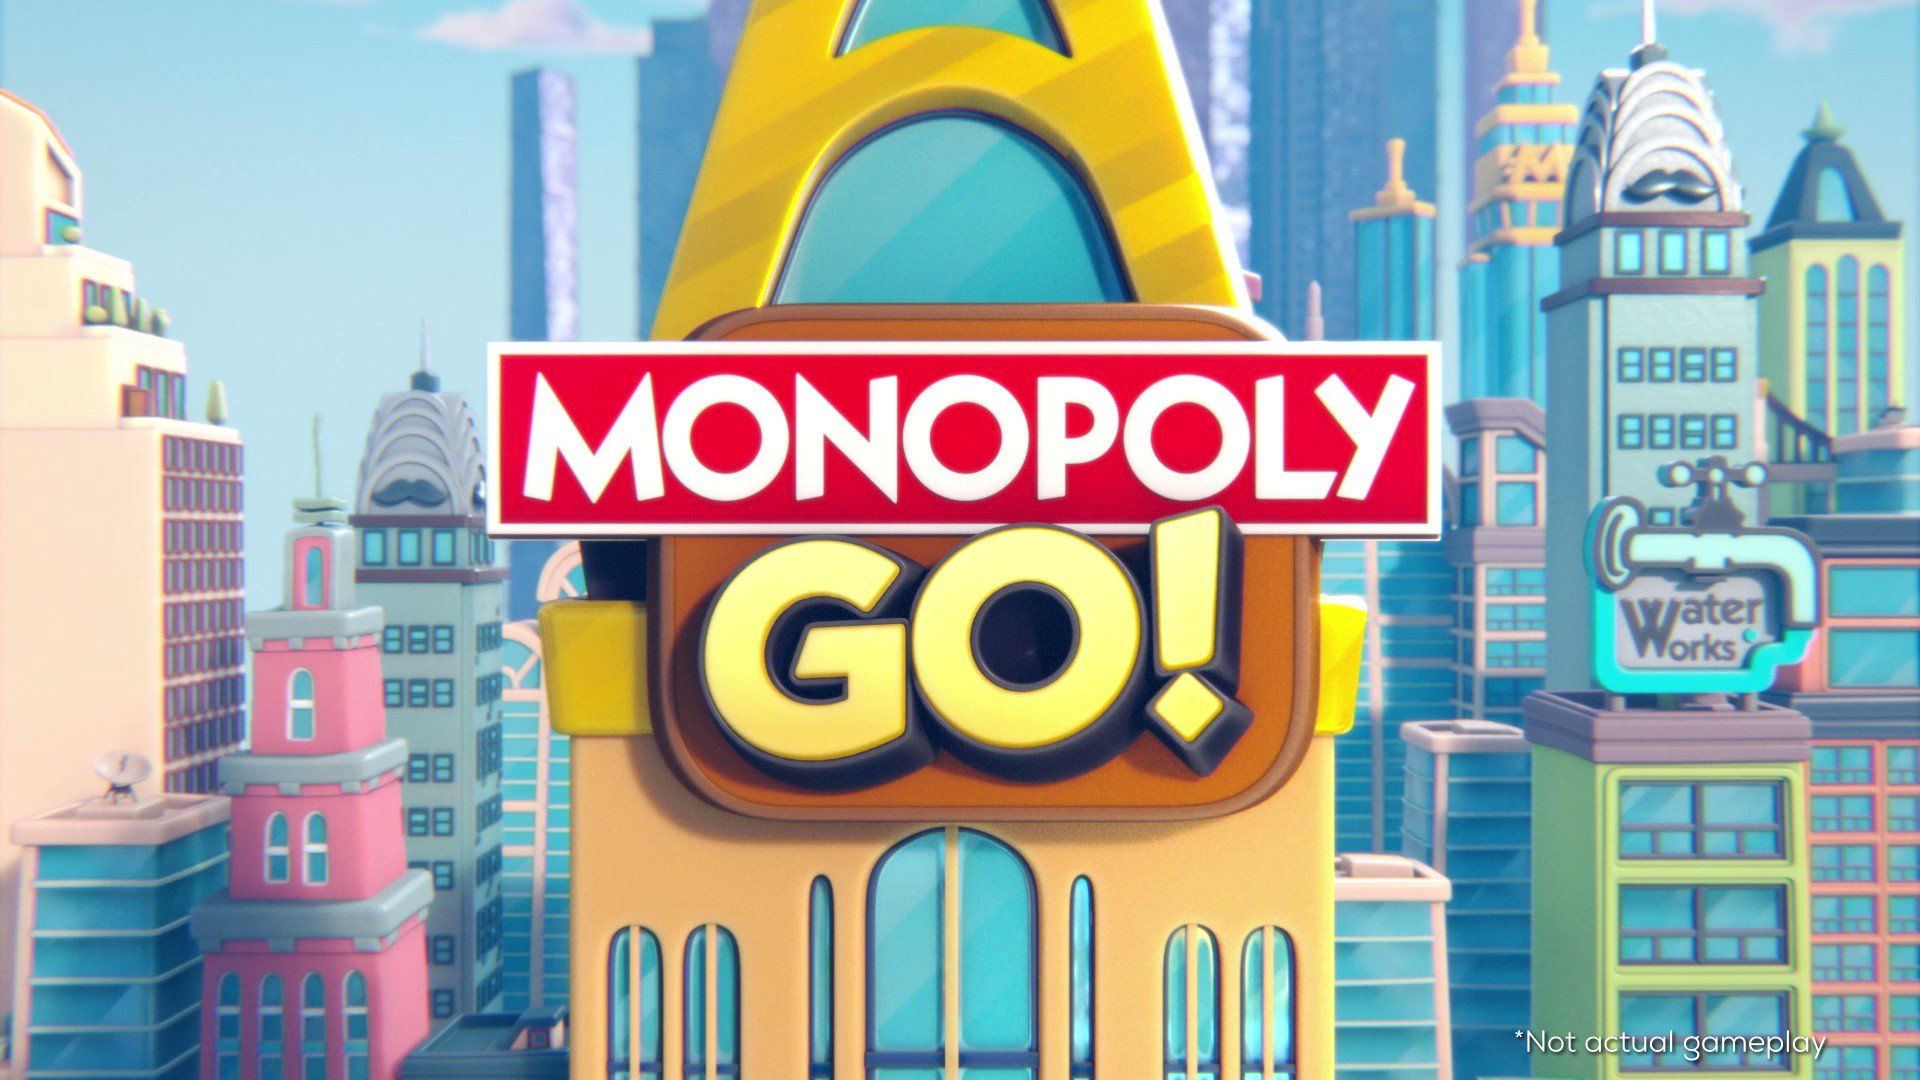 Monopoly GO background saver seen before claiming rewards like free dice rolls